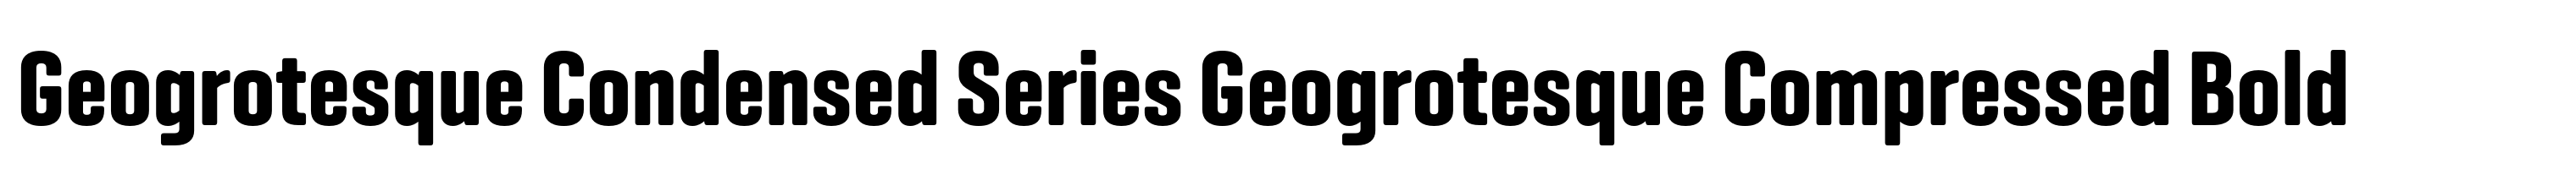 Geogrotesque Condensed Series Geogrotesque Compressed Bold